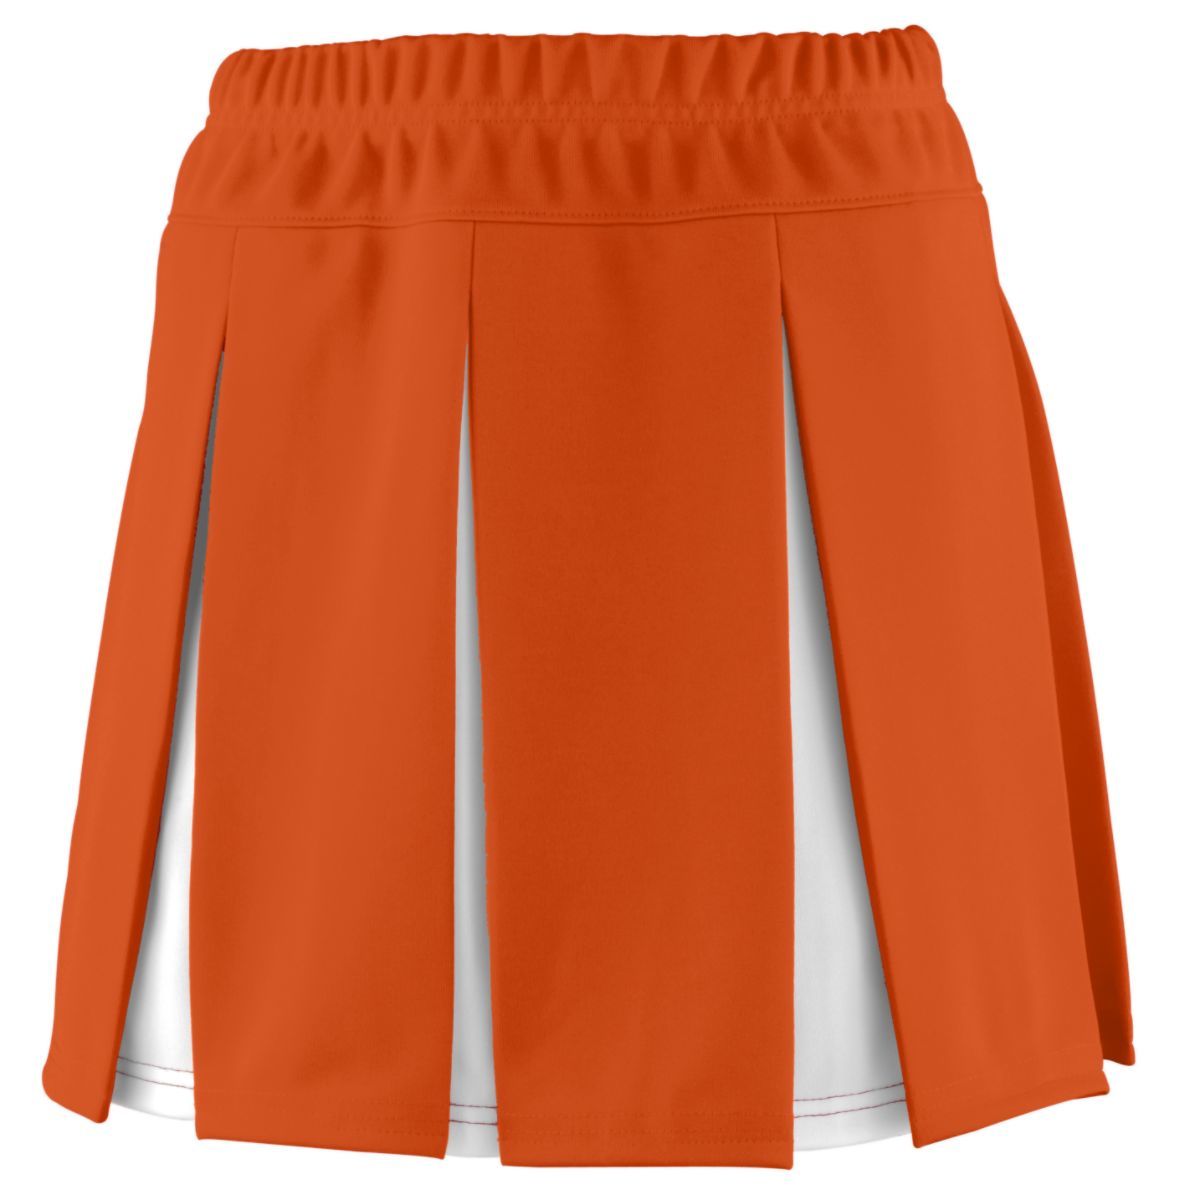 Augusta Sportswear Girls Liberty Skirt in Orange/White  -Part of the Girls, Augusta-Products, Cheer product lines at KanaleyCreations.com